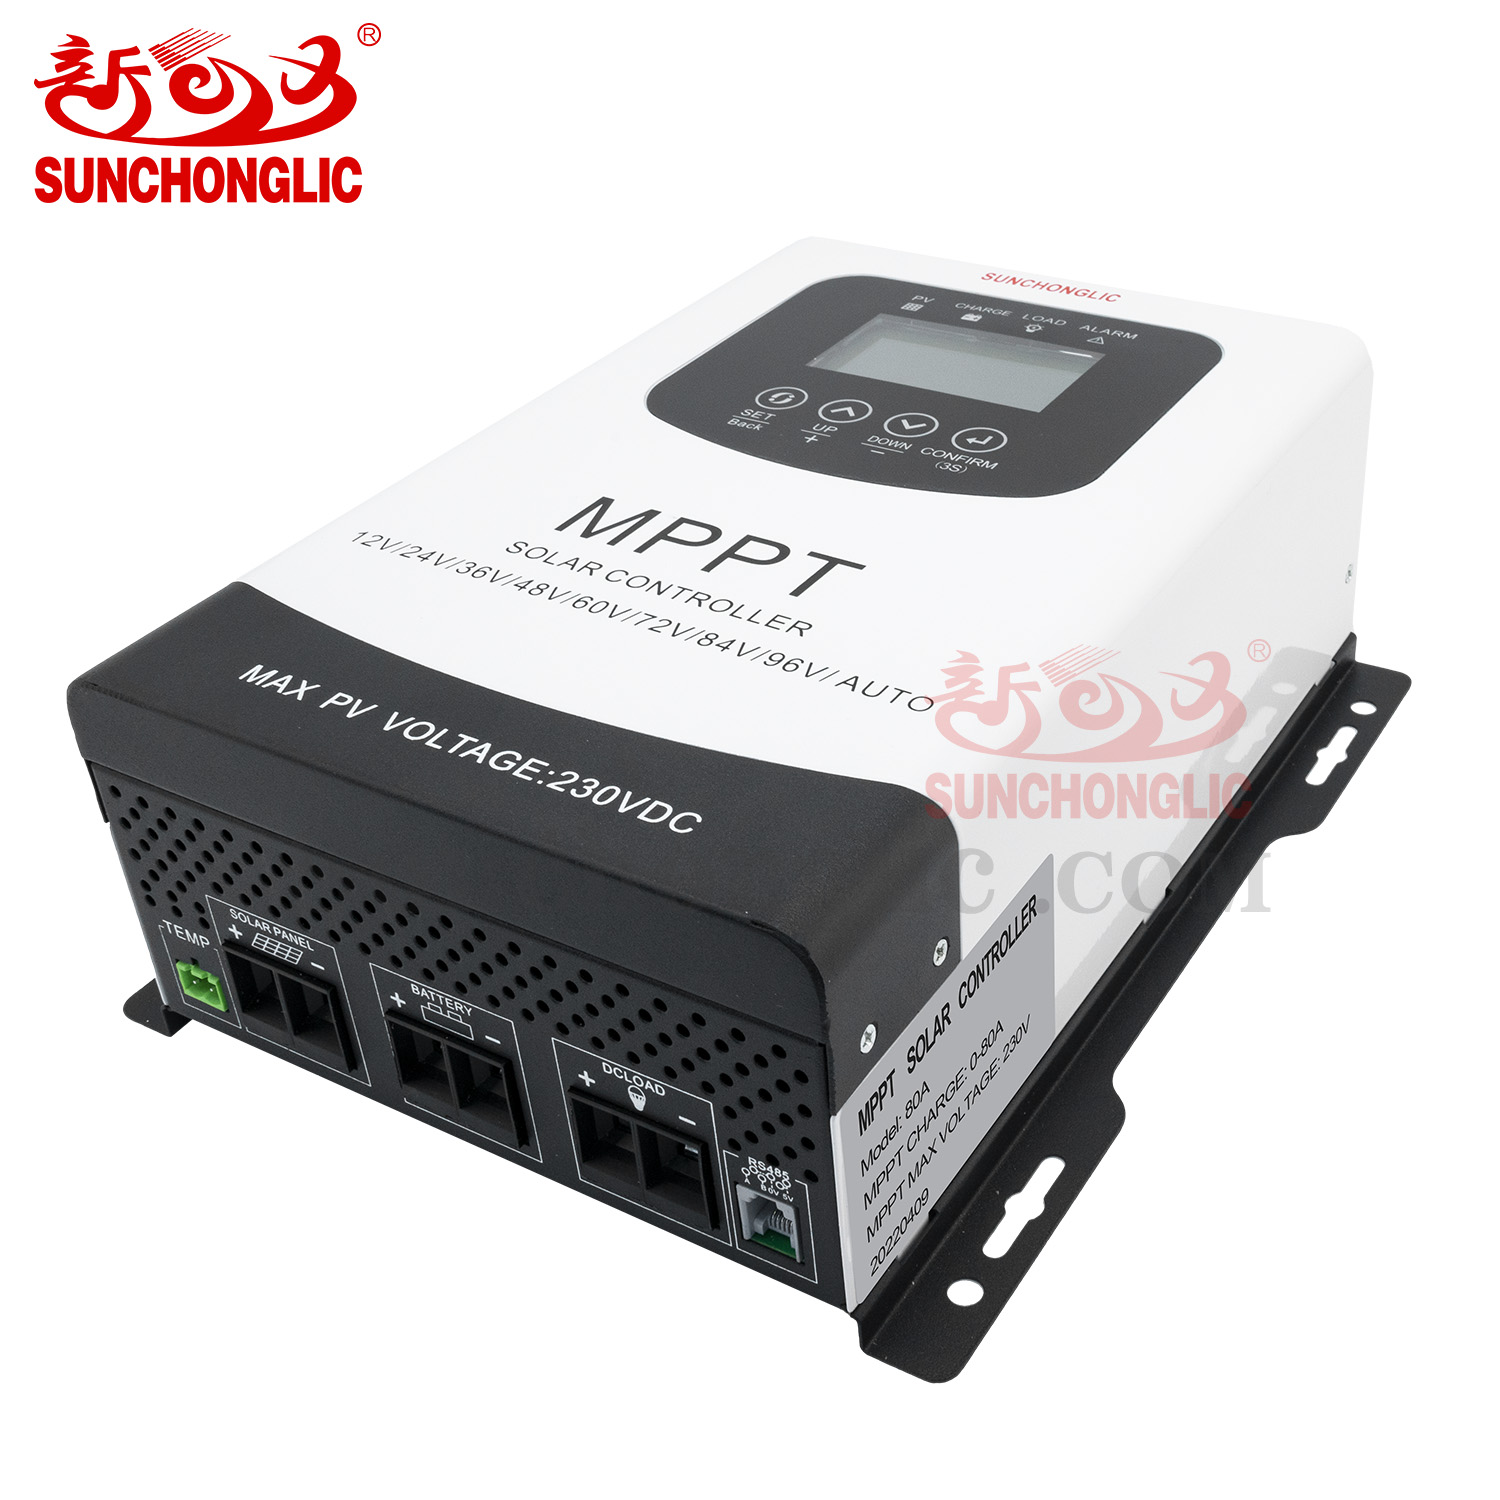 MPPT Solar Charge Controller - MPPT 80A